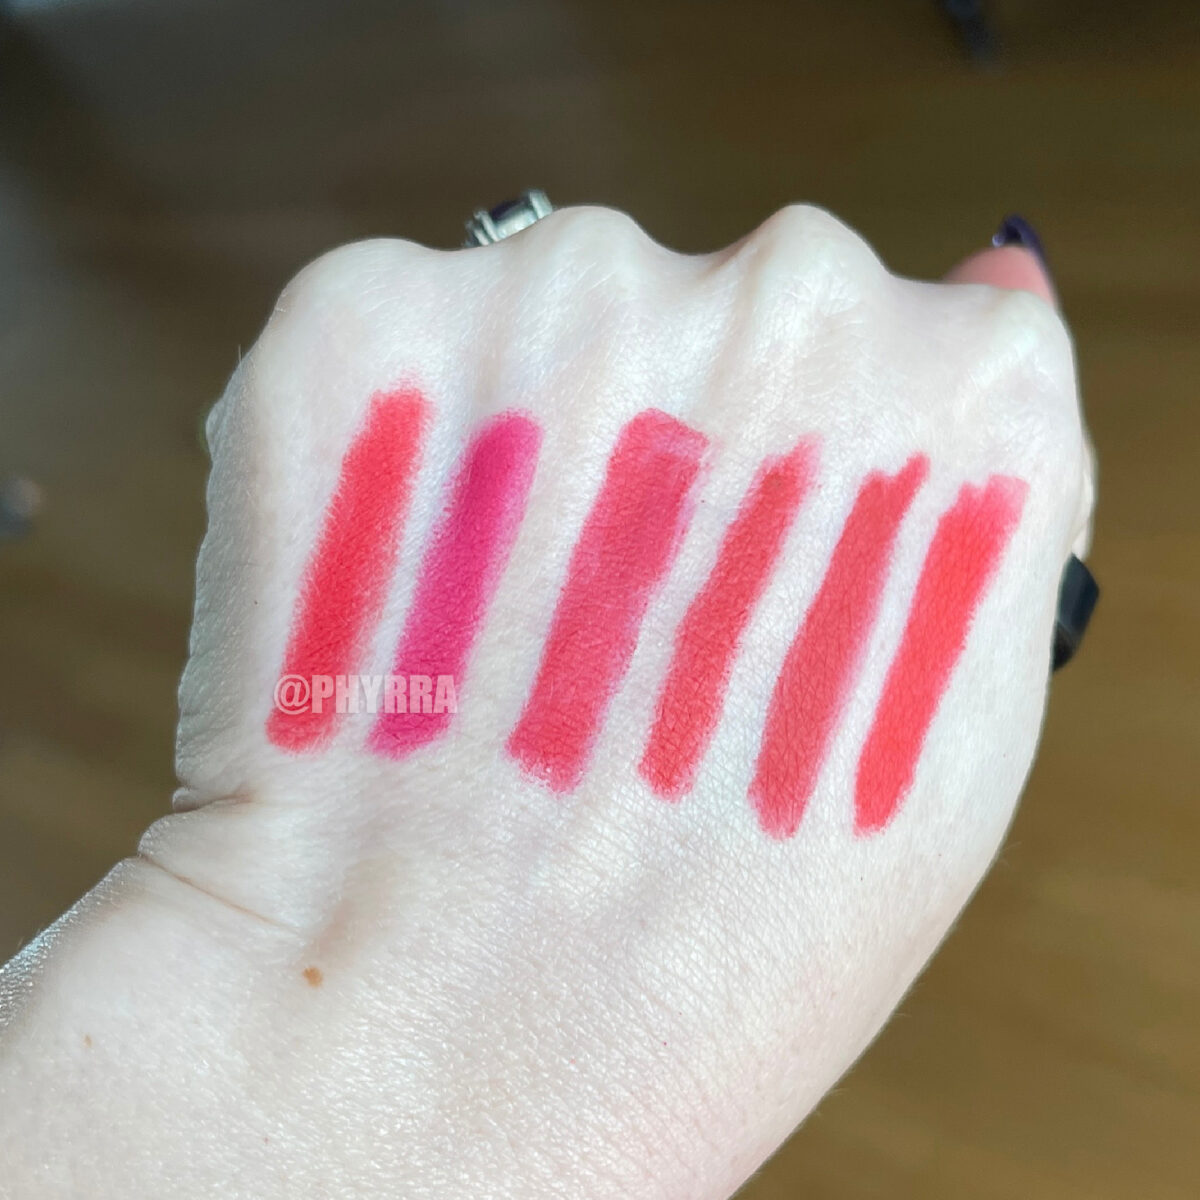 Red lip pencil swatches on pale skin indoors in indirect sunlight